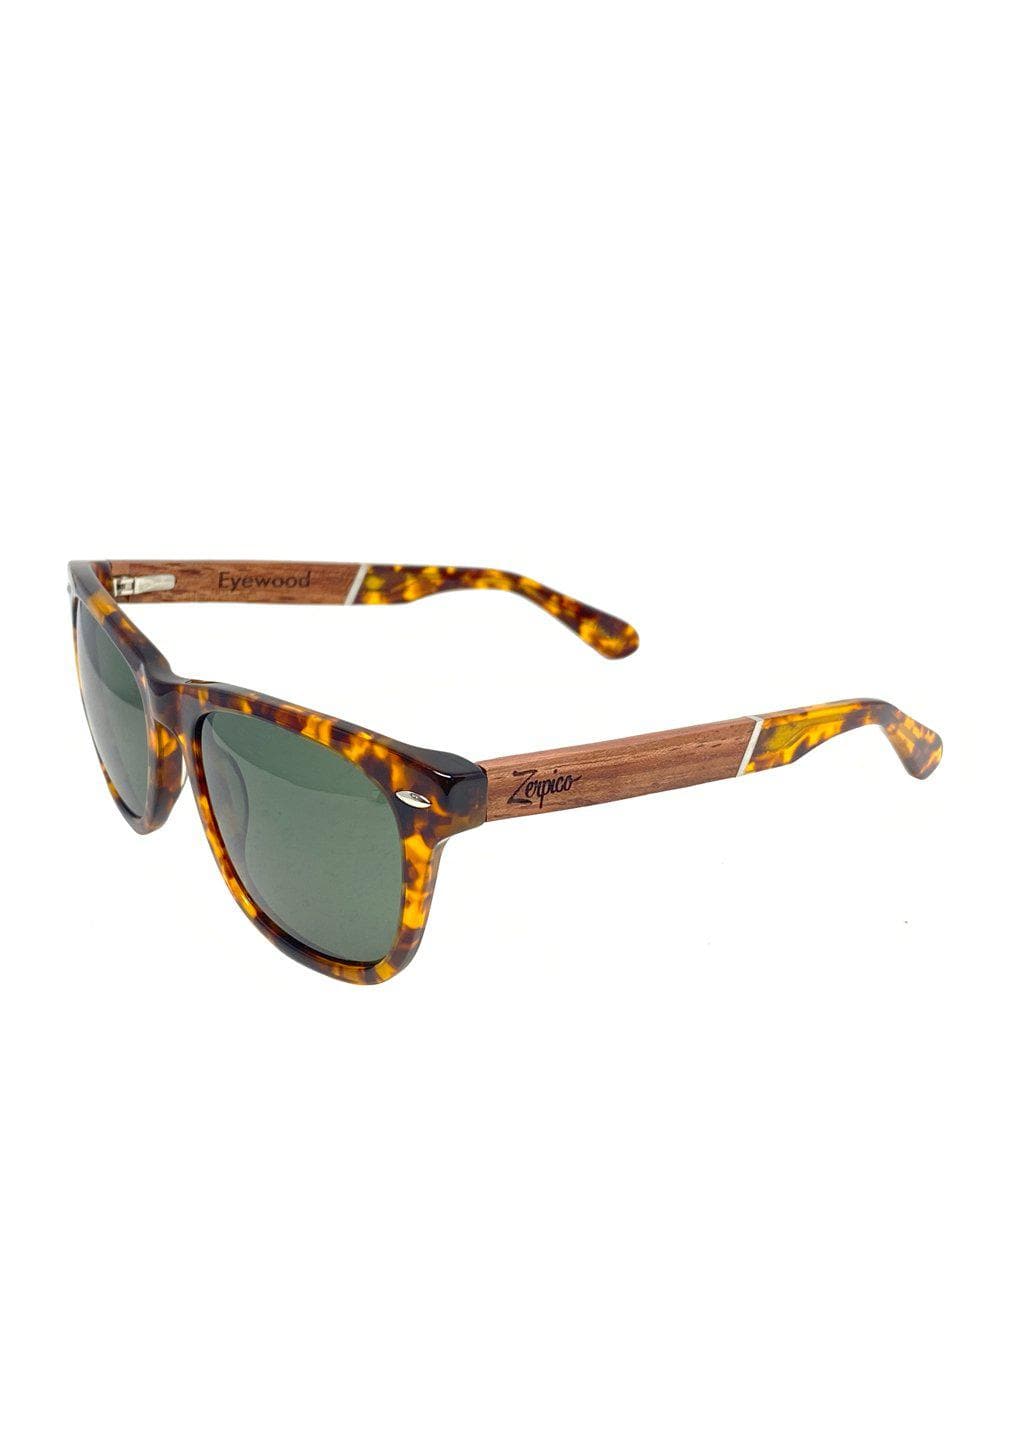 Eyewood Wayfarers - Fusion - Lynx - A mix of acetate and wood makes theses sunglasses unique. From the side.